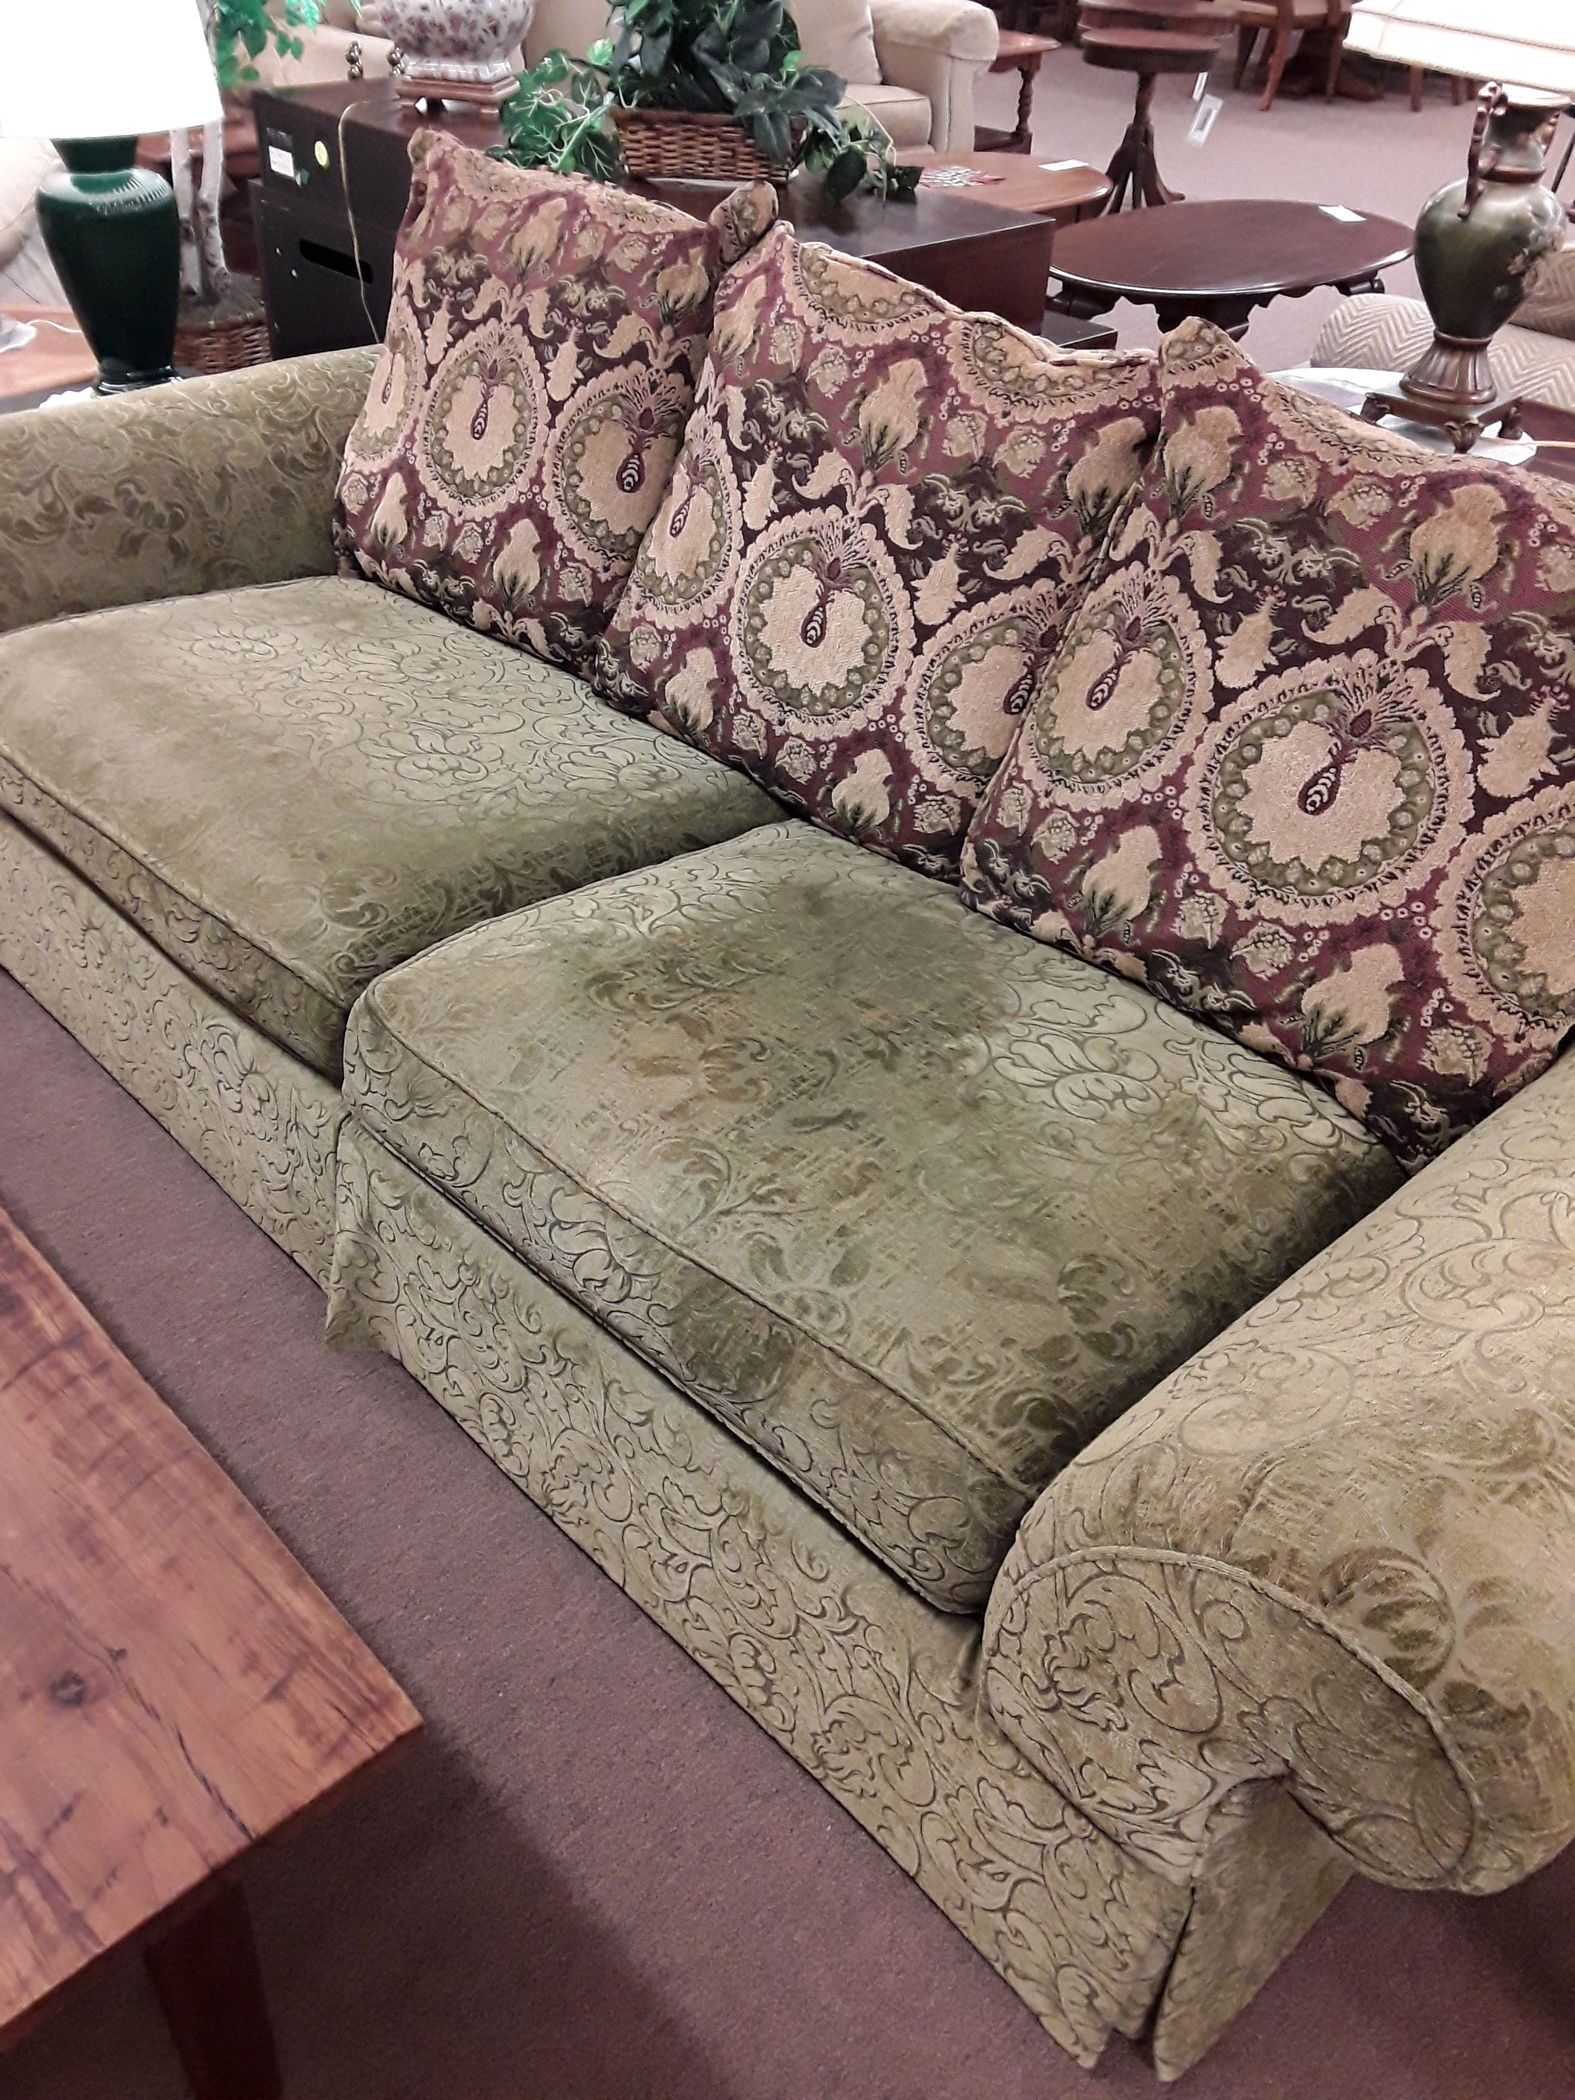 Thomasville Pillow Back Sofa | Delmarva Furniture Consignment With Regard To Sofas With Pillowback Wood Bases (View 4 of 20)